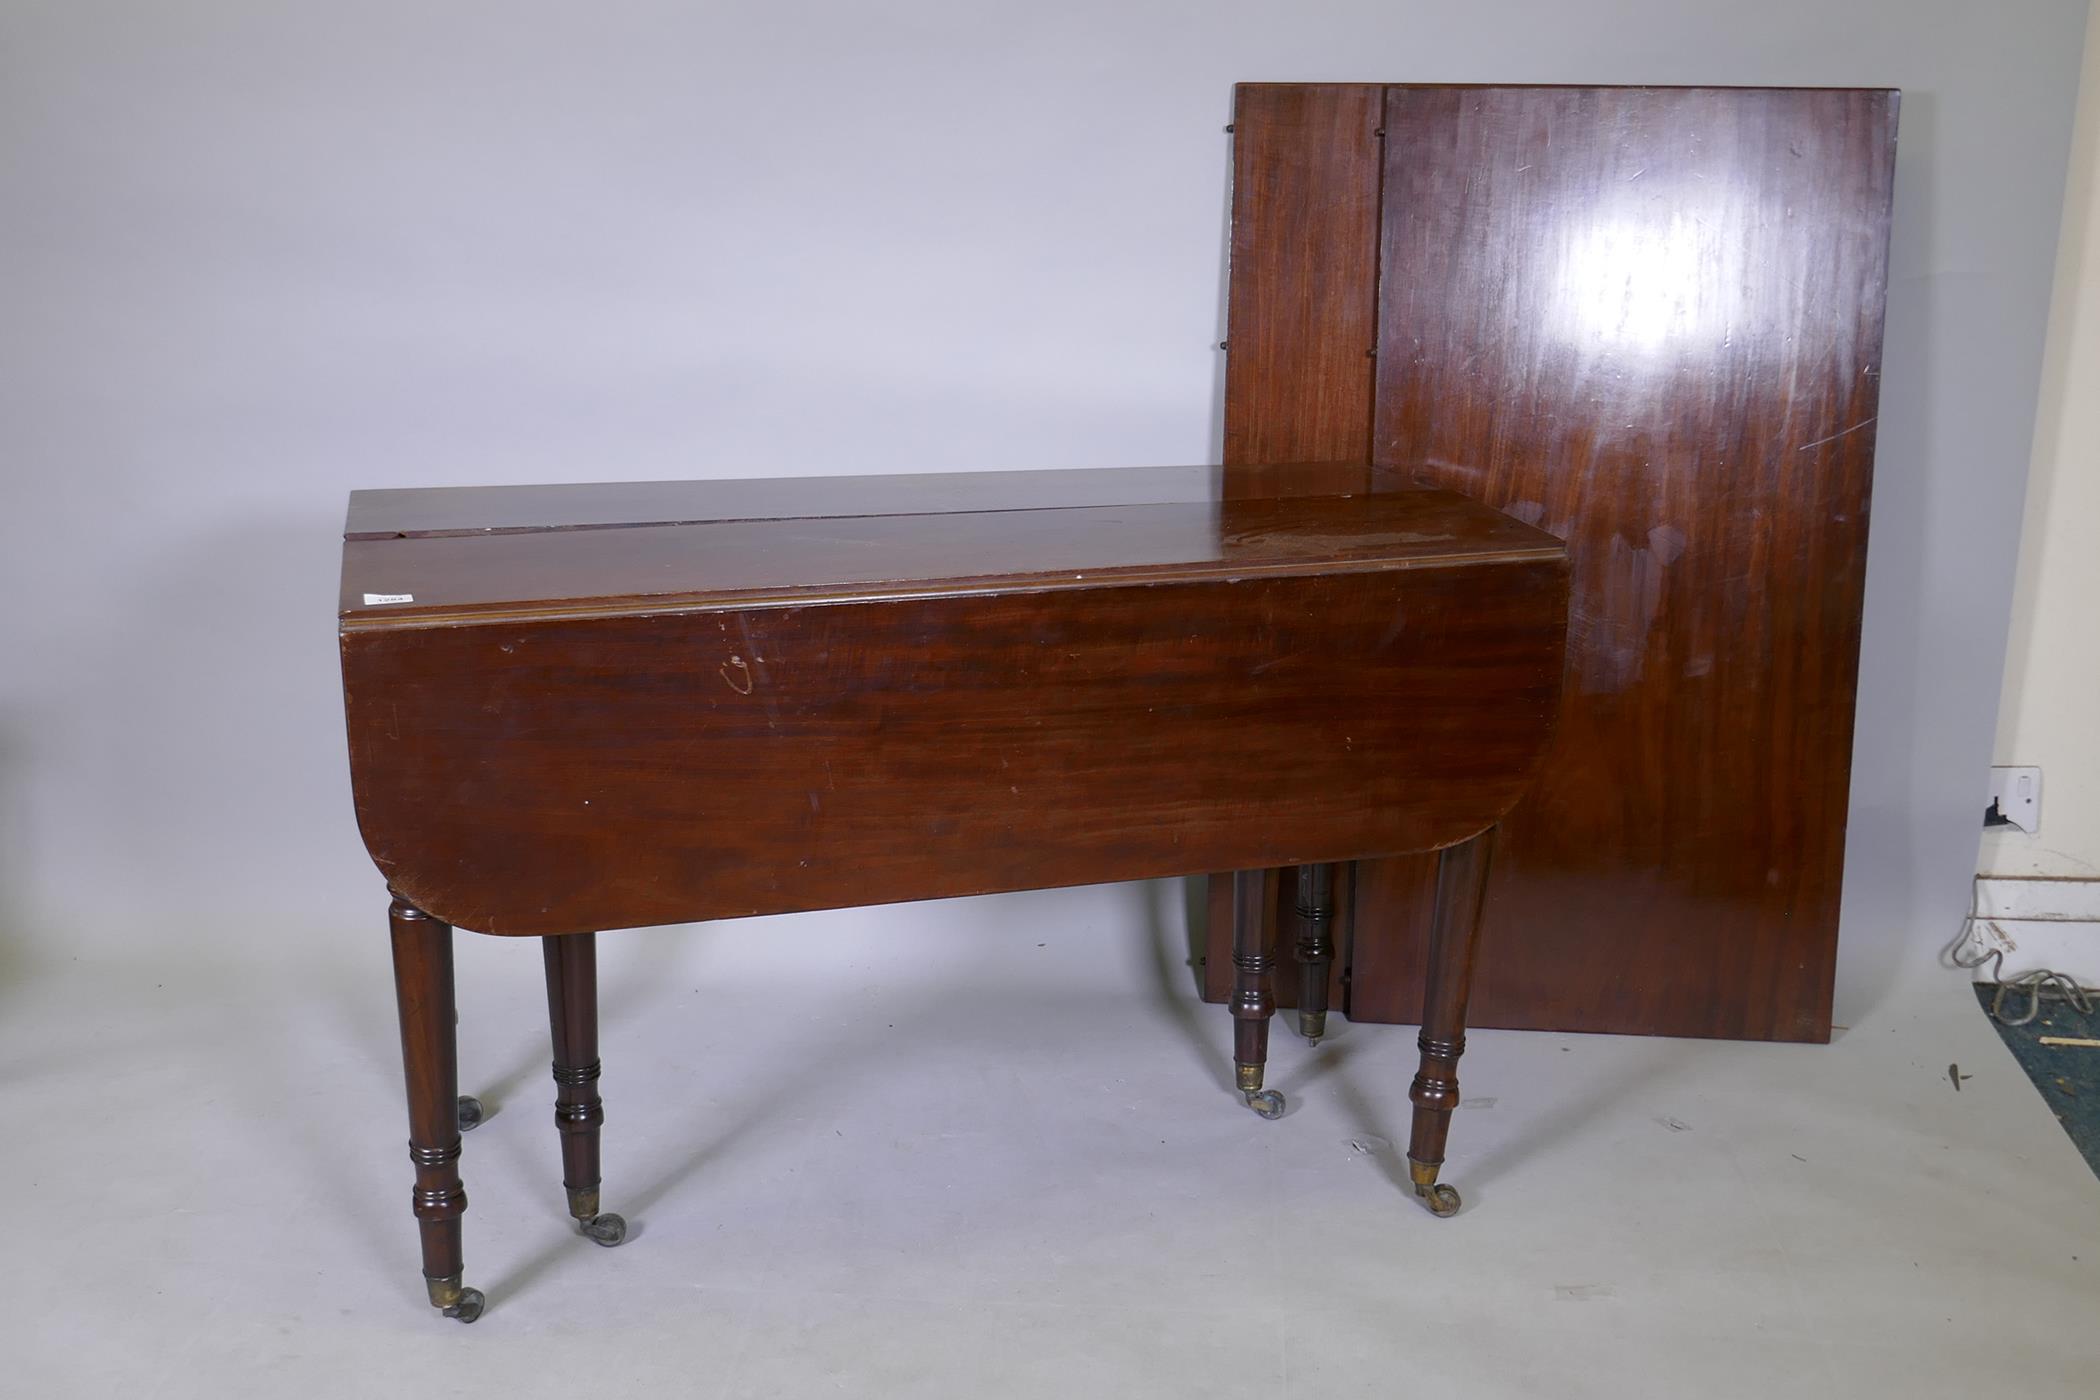 A C19th mahogany drop leaf dining table with concertina action and two extra leaves, one leg AF, 112